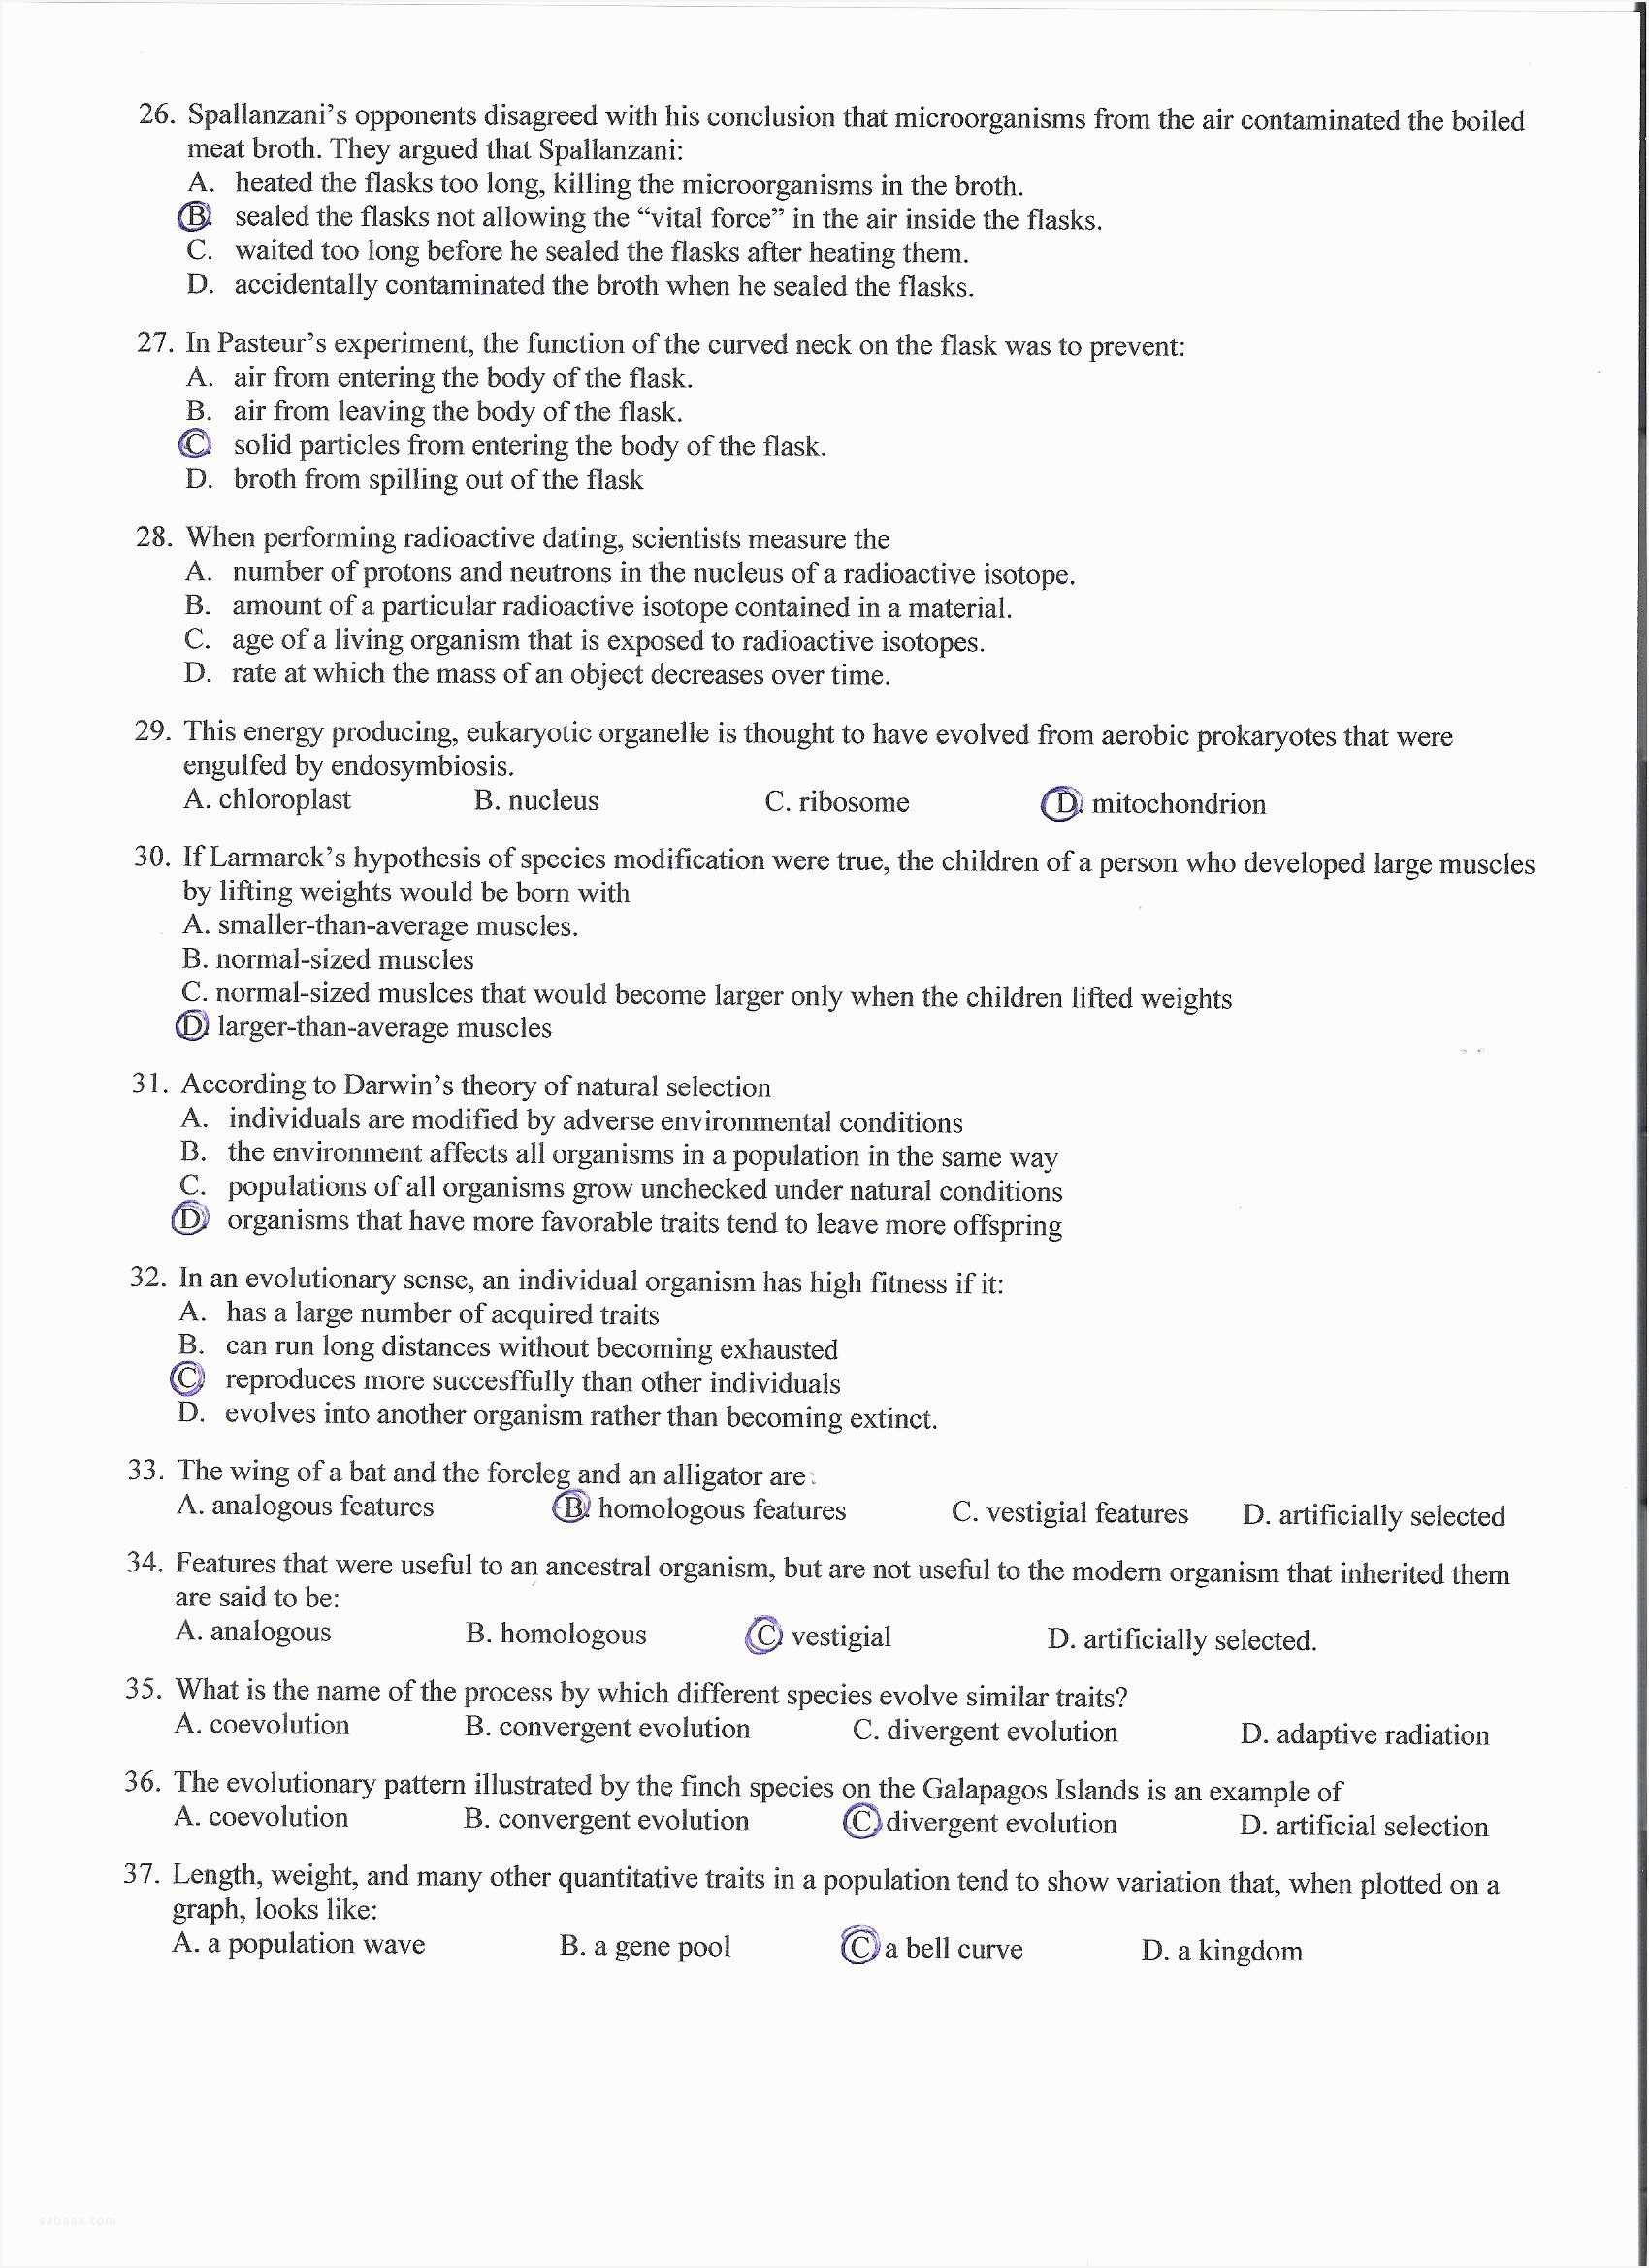 Dna Review Worksheet Also Search Results for “” – Sabaax